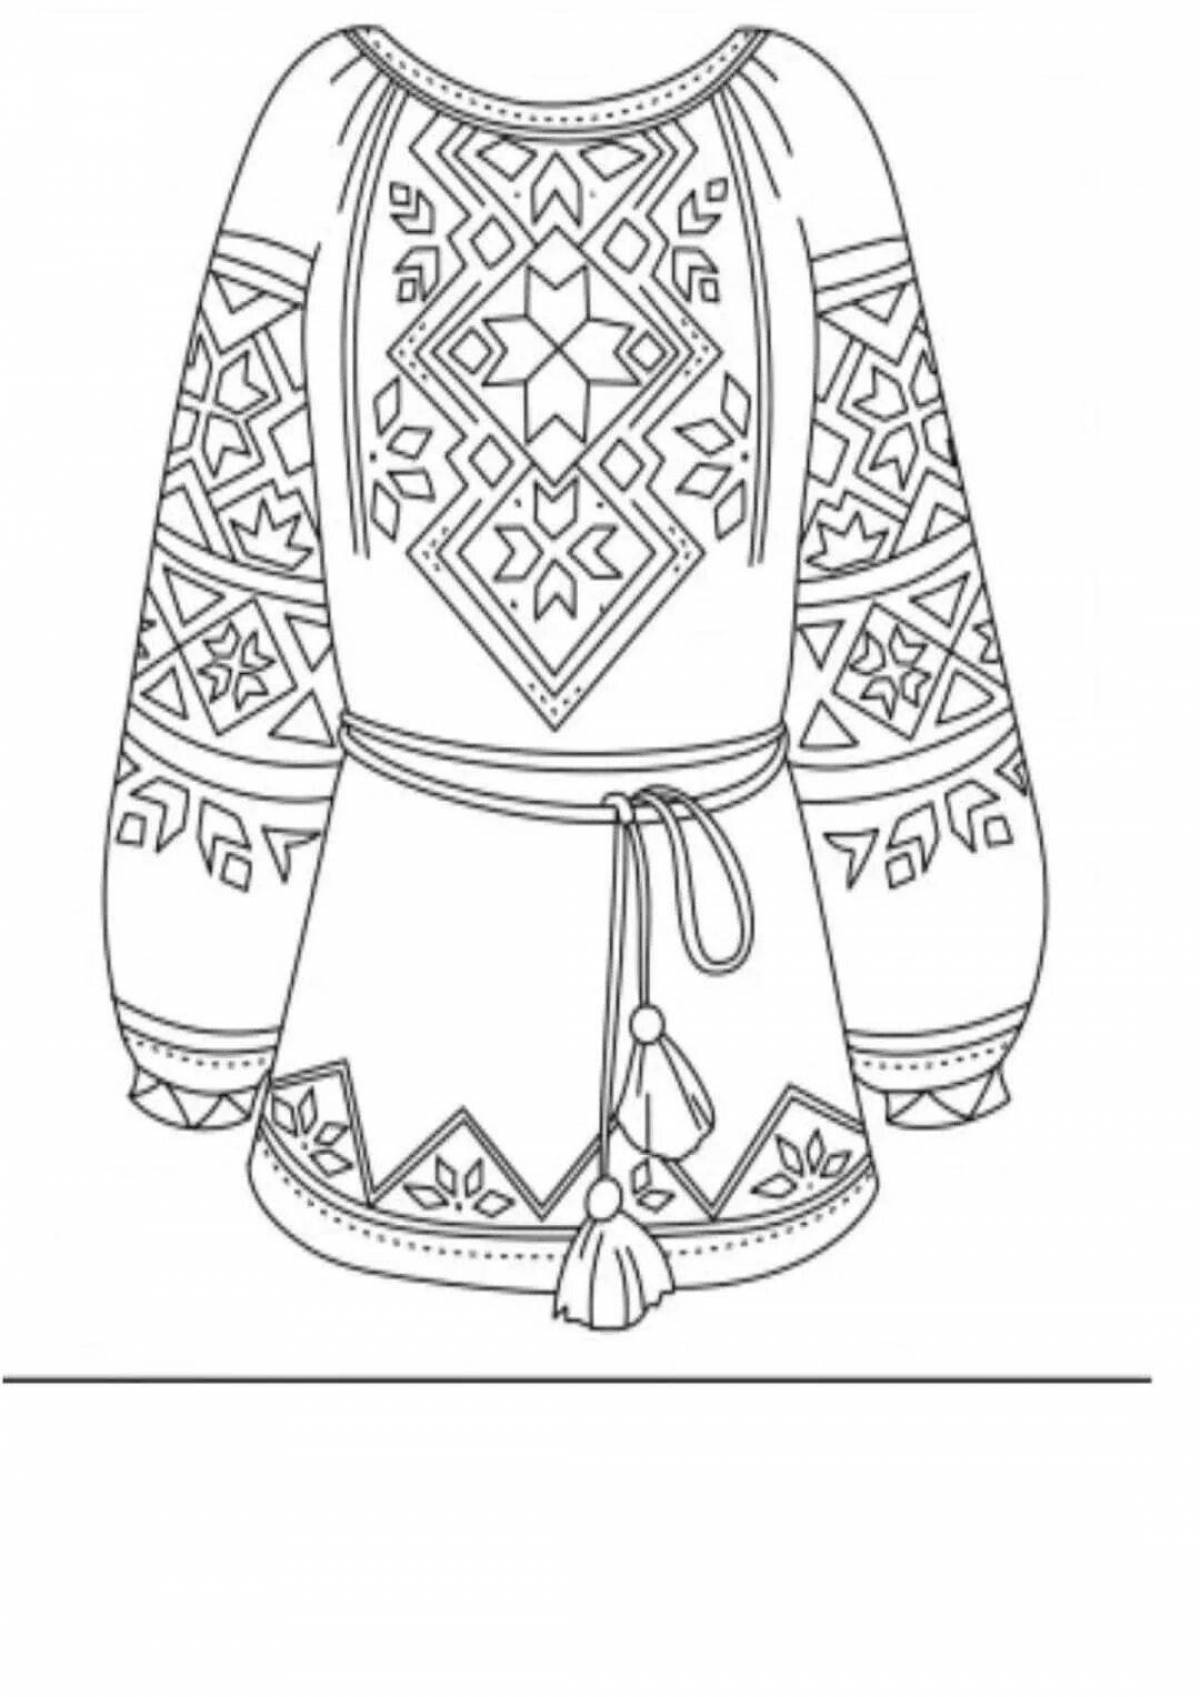 Coloring page dazzling Chuvash patterns